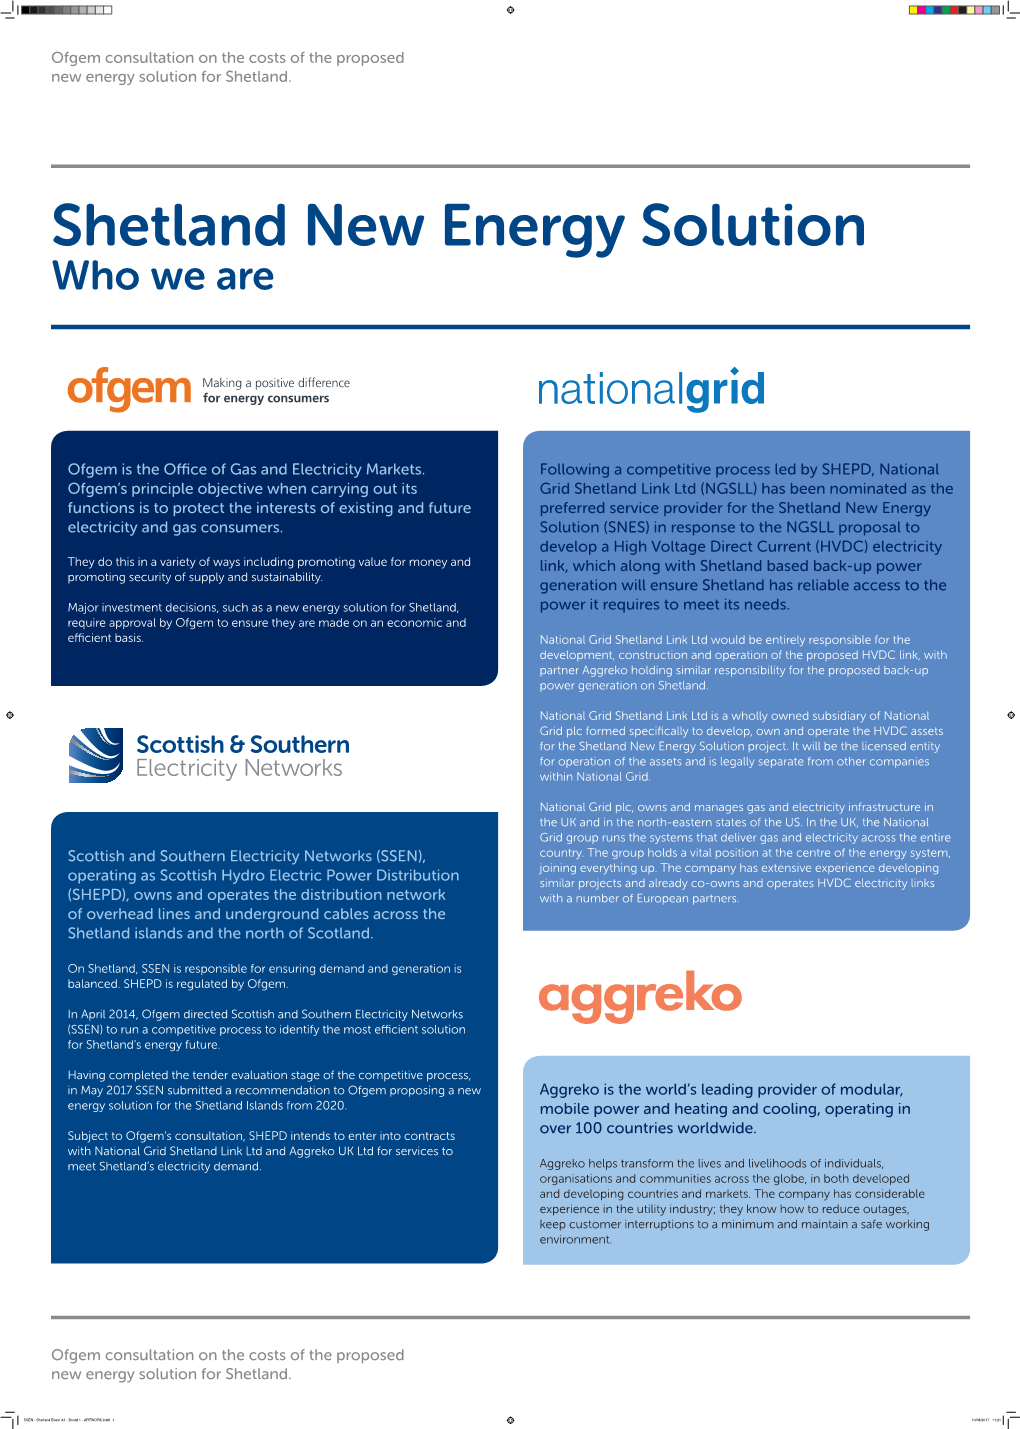 Ofgem Consultation on the Costs of the Proposed New Energy Solution for Shetland. Ofgem Consultation on the Costs of the Propose